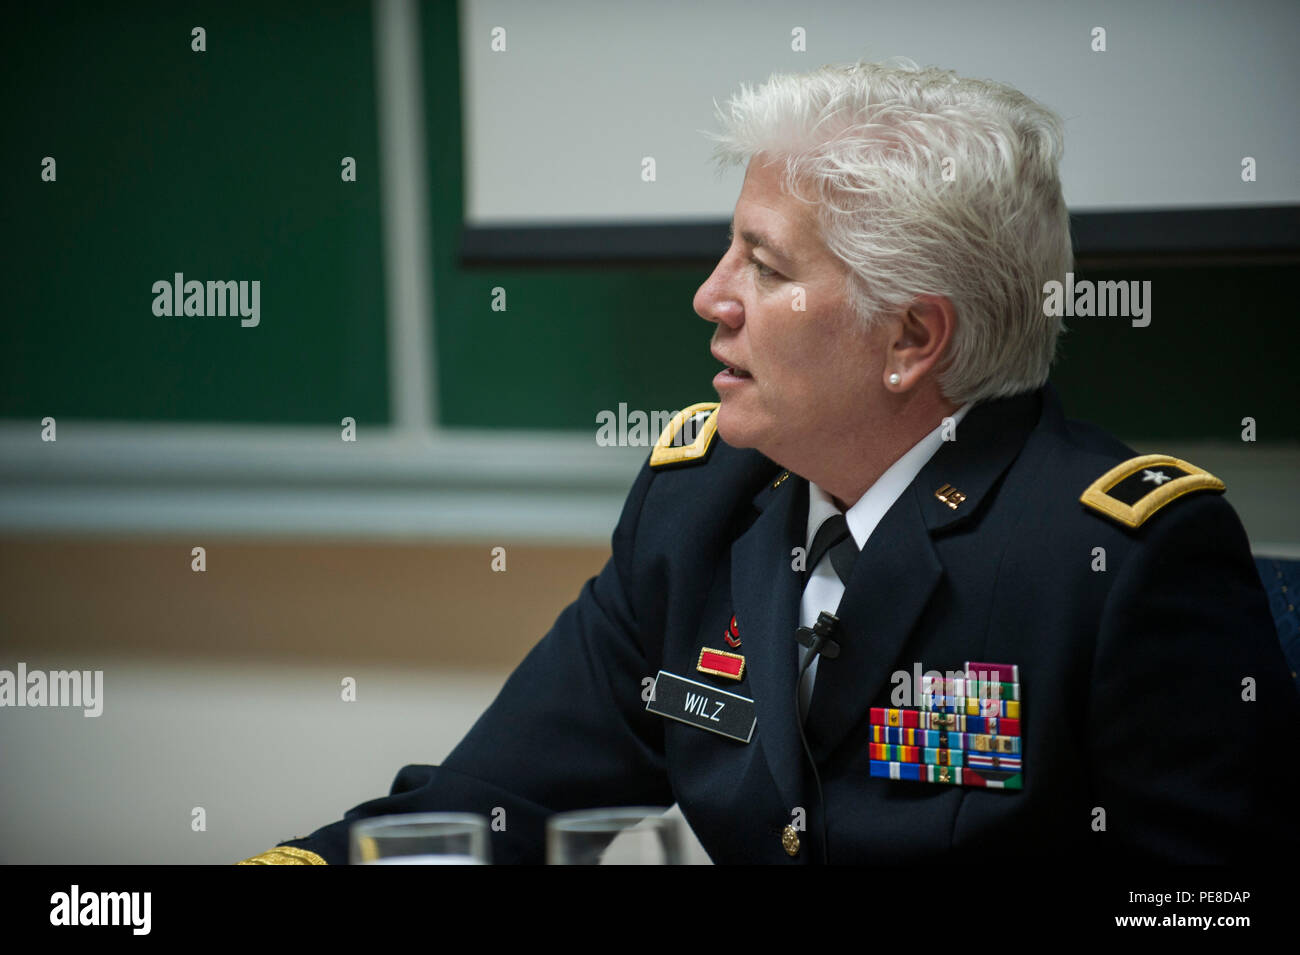 U.S. Army Brig. Gen. Giselle Wilz, NATO Headquarters Sarajevo commander, speaks to students at the University of Tuzla's Faculty of Law in Tuzla, Bosnia and Herzegovina, Oct. 26, 2015. Wilz spoke about NATO and NHQSa's mission before answering questions from students. (U.S. Air Force photo by Staff Sgt. Clayton Lenhardt/Released) Stock Photo